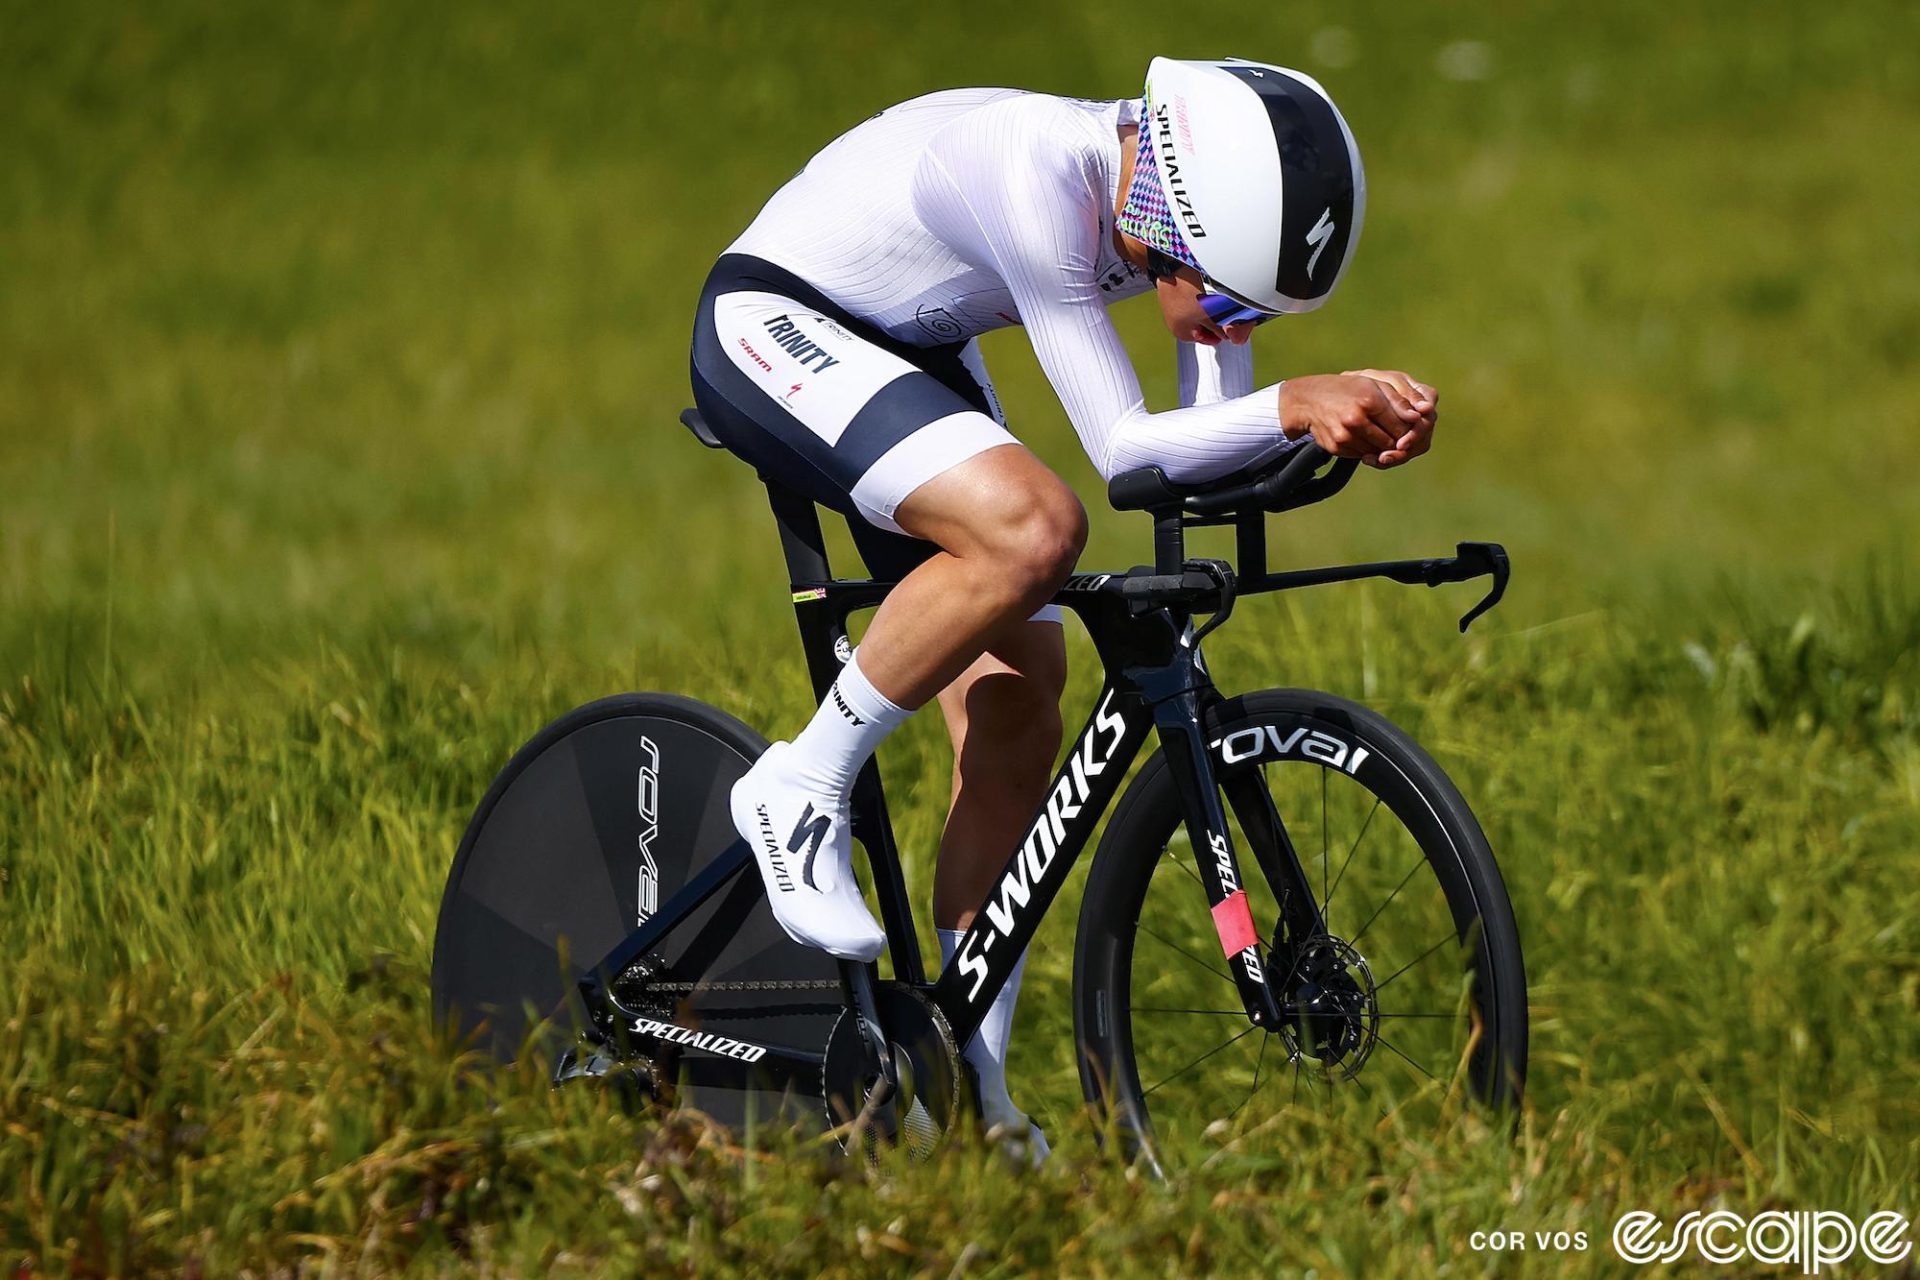 Lukas Nerurkar time trials at the O Gran Camiño stage race. He's in a white and black Trinity skinsuit on a Specialized Shiv, head down in an aero tuck.